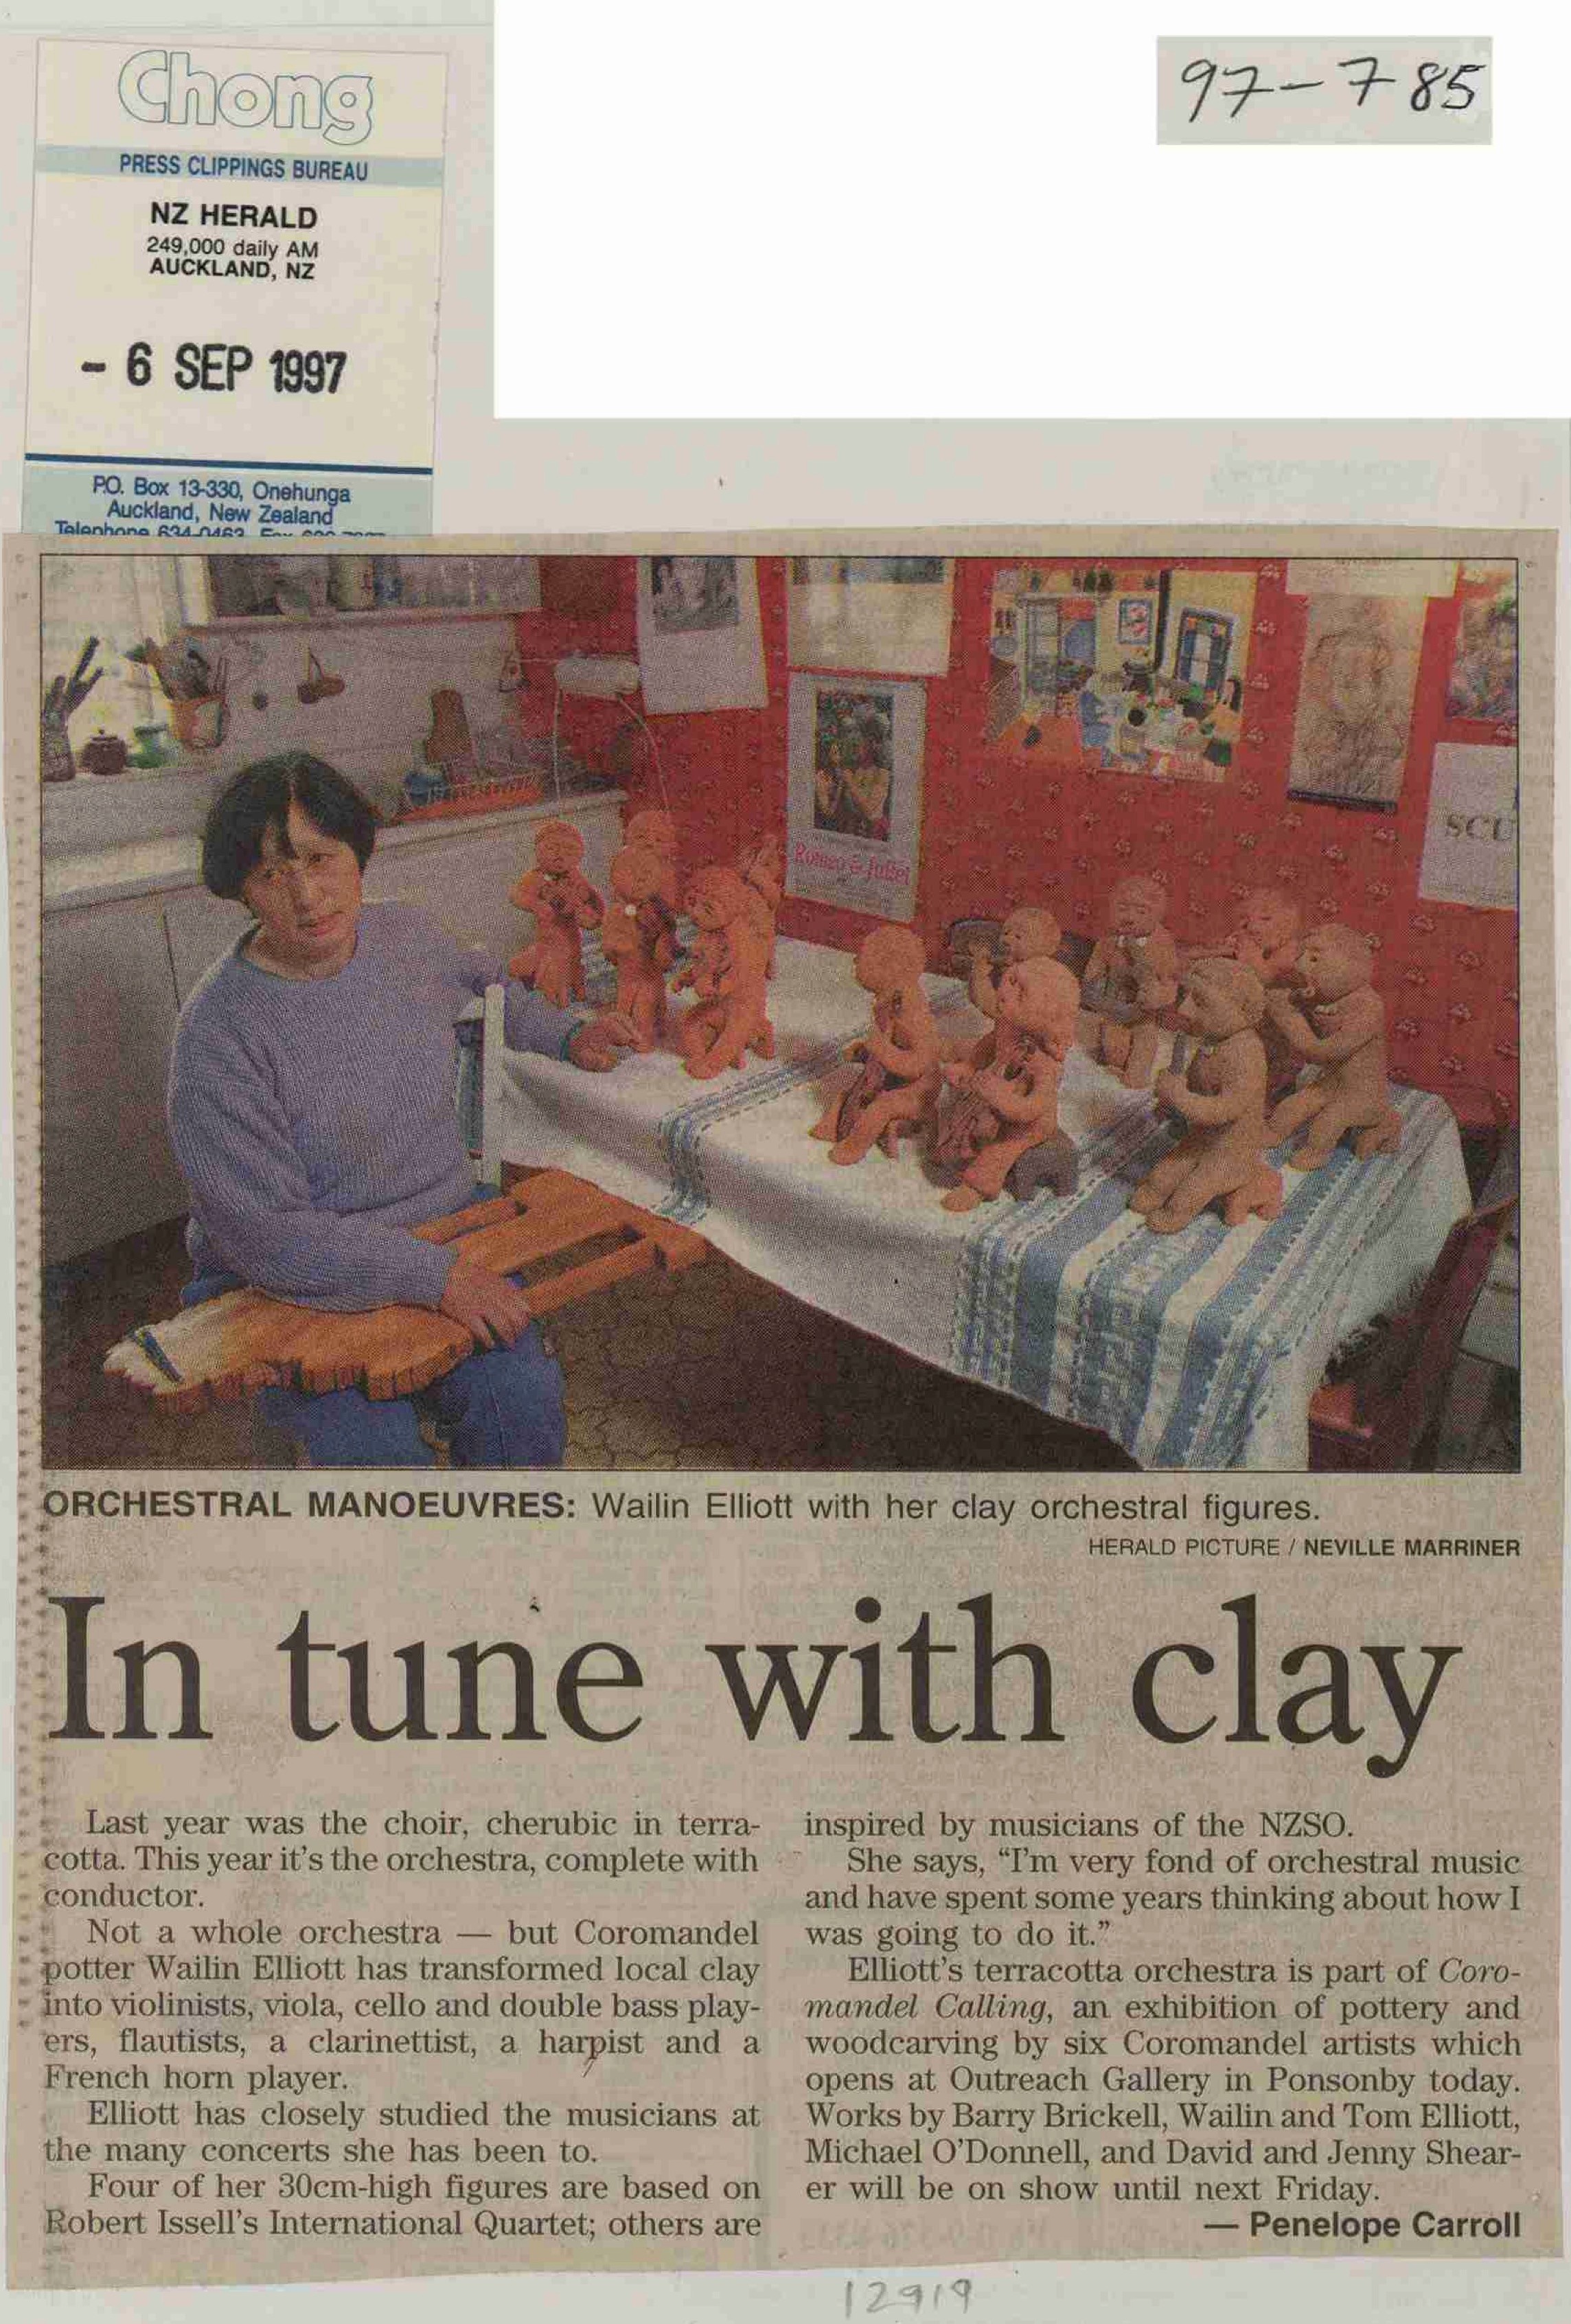 Nespaper clipping with colour photo of Wailin Elliott with her clay figures of musicians.